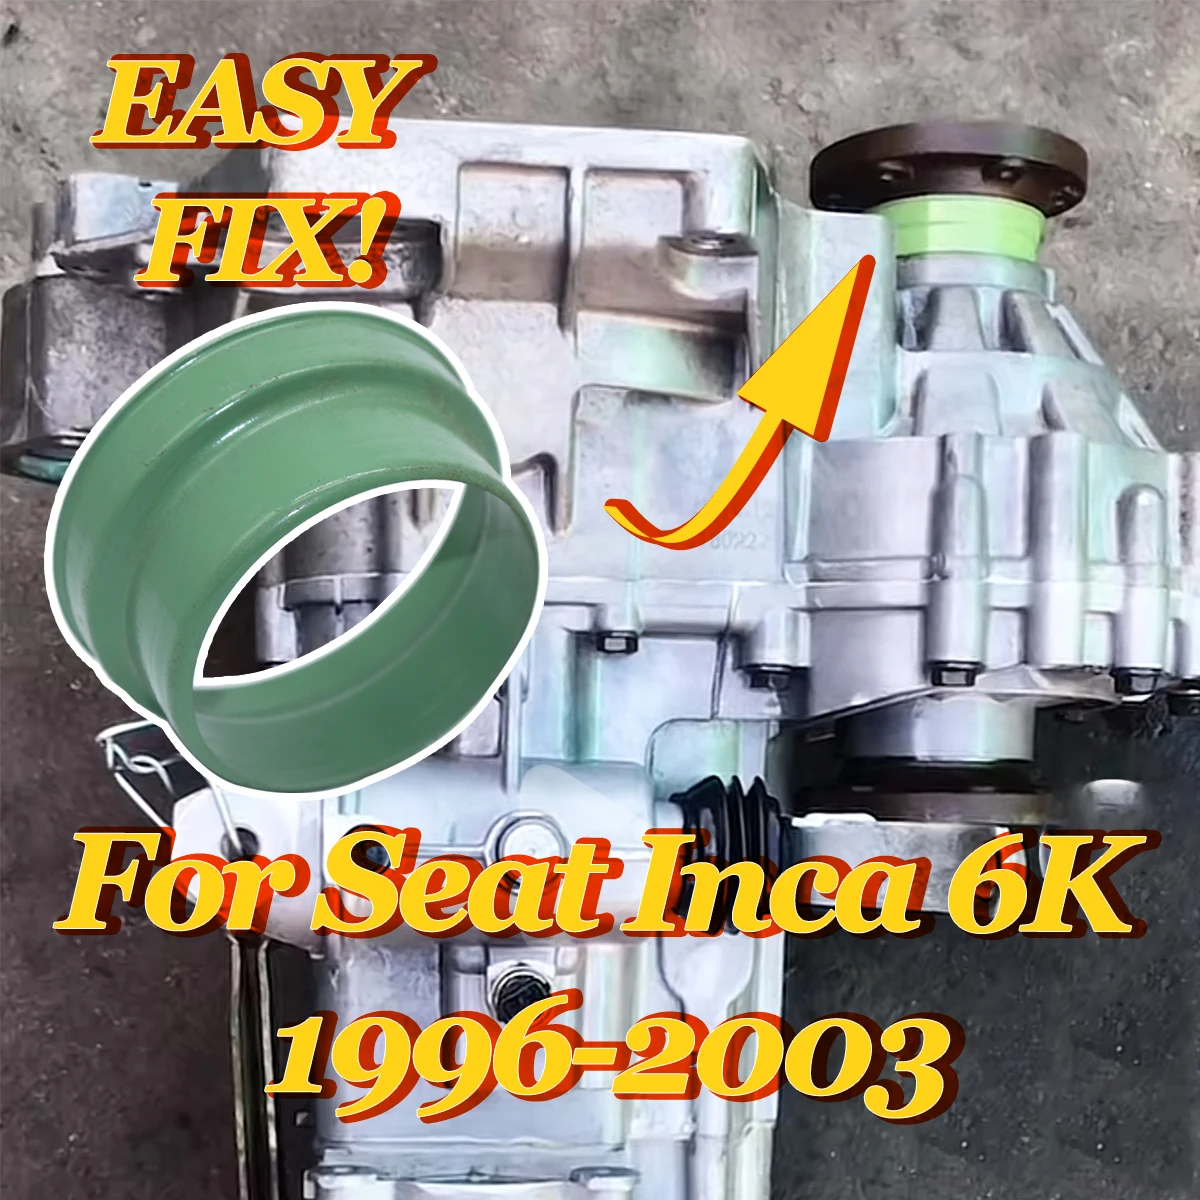 

5SP Manual Gearbox 020 Seal Housing Transmission Axle Drive Flange Sleeve For Seat Inca 6K 1996-2003 Cordoba 6K VW 020301192A